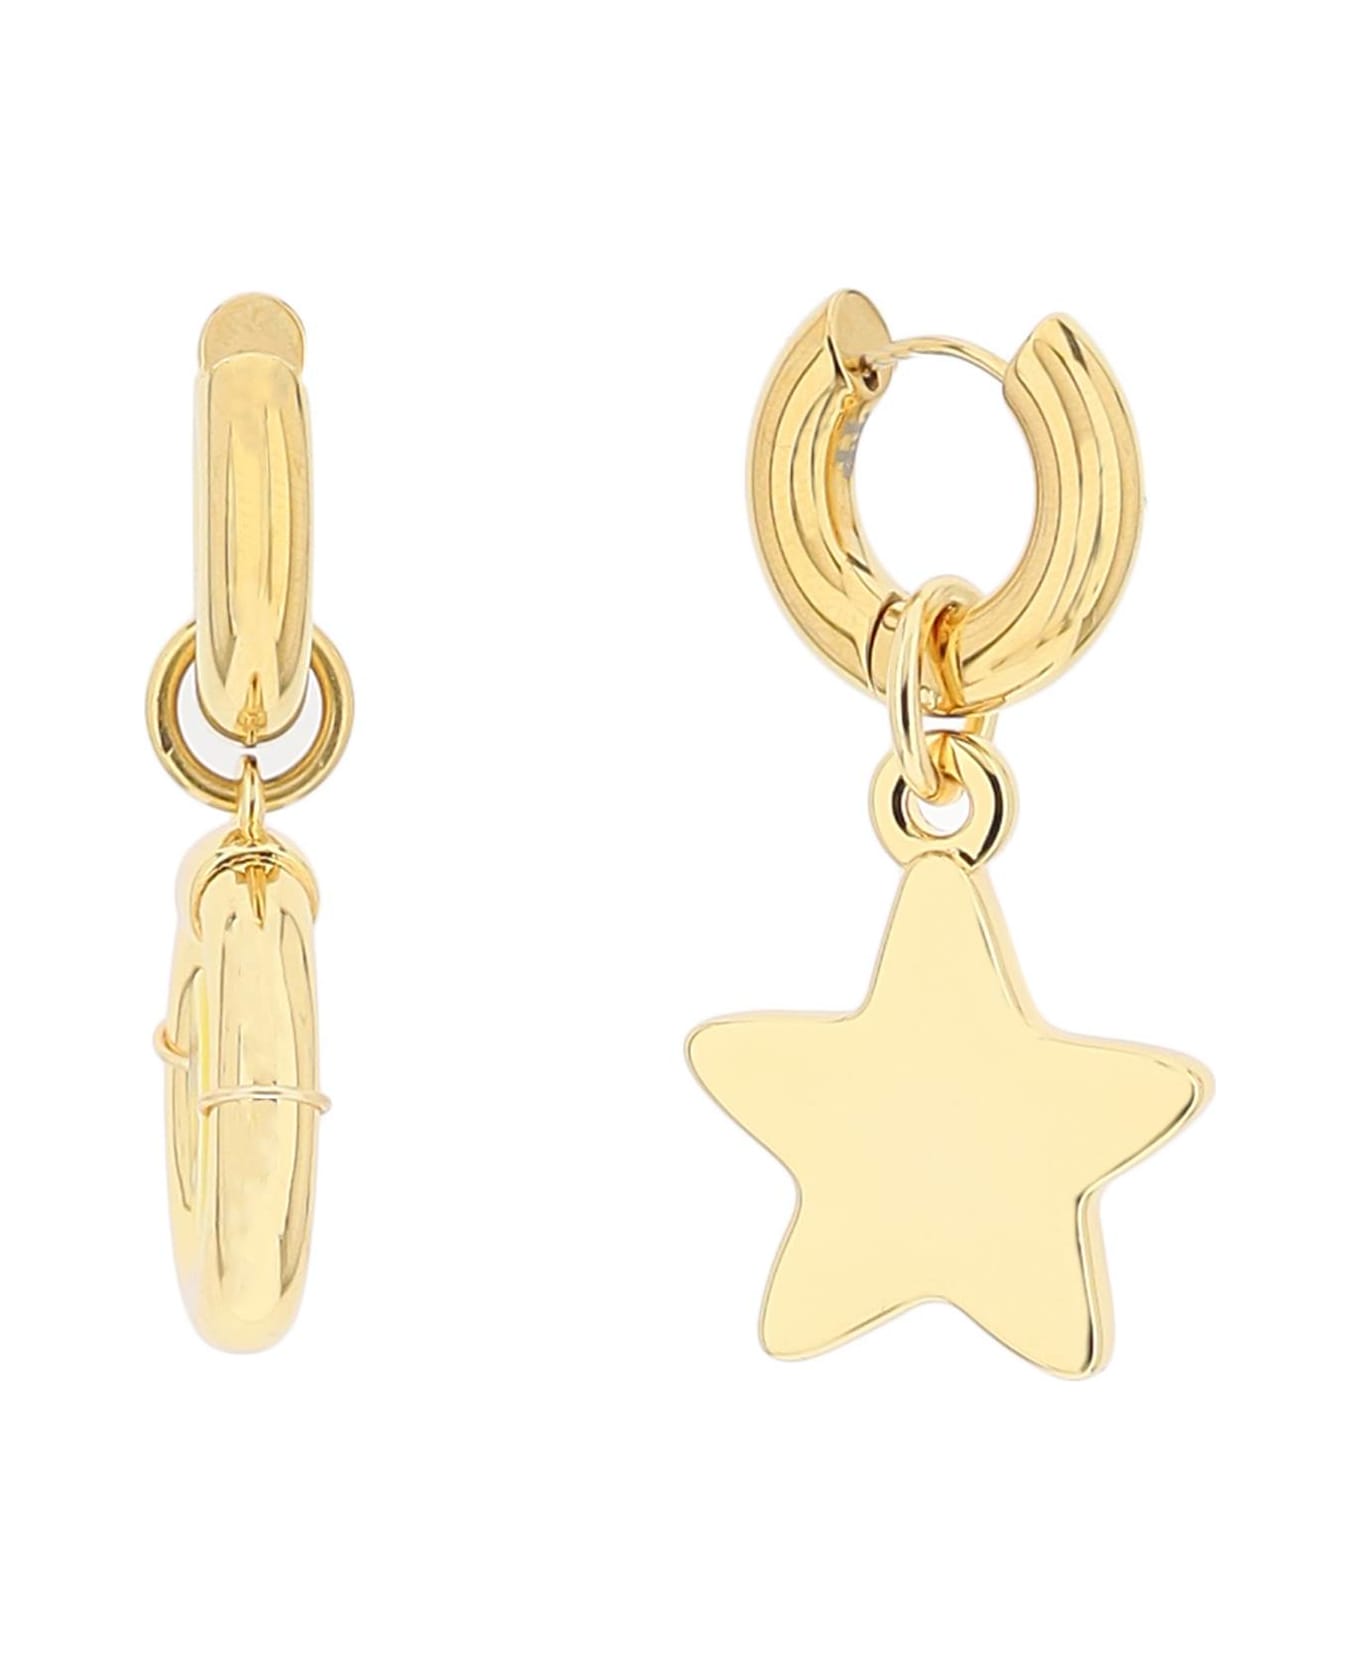 Timeless Pearly Earrings With Charms - GOLD (Gold) イヤリング